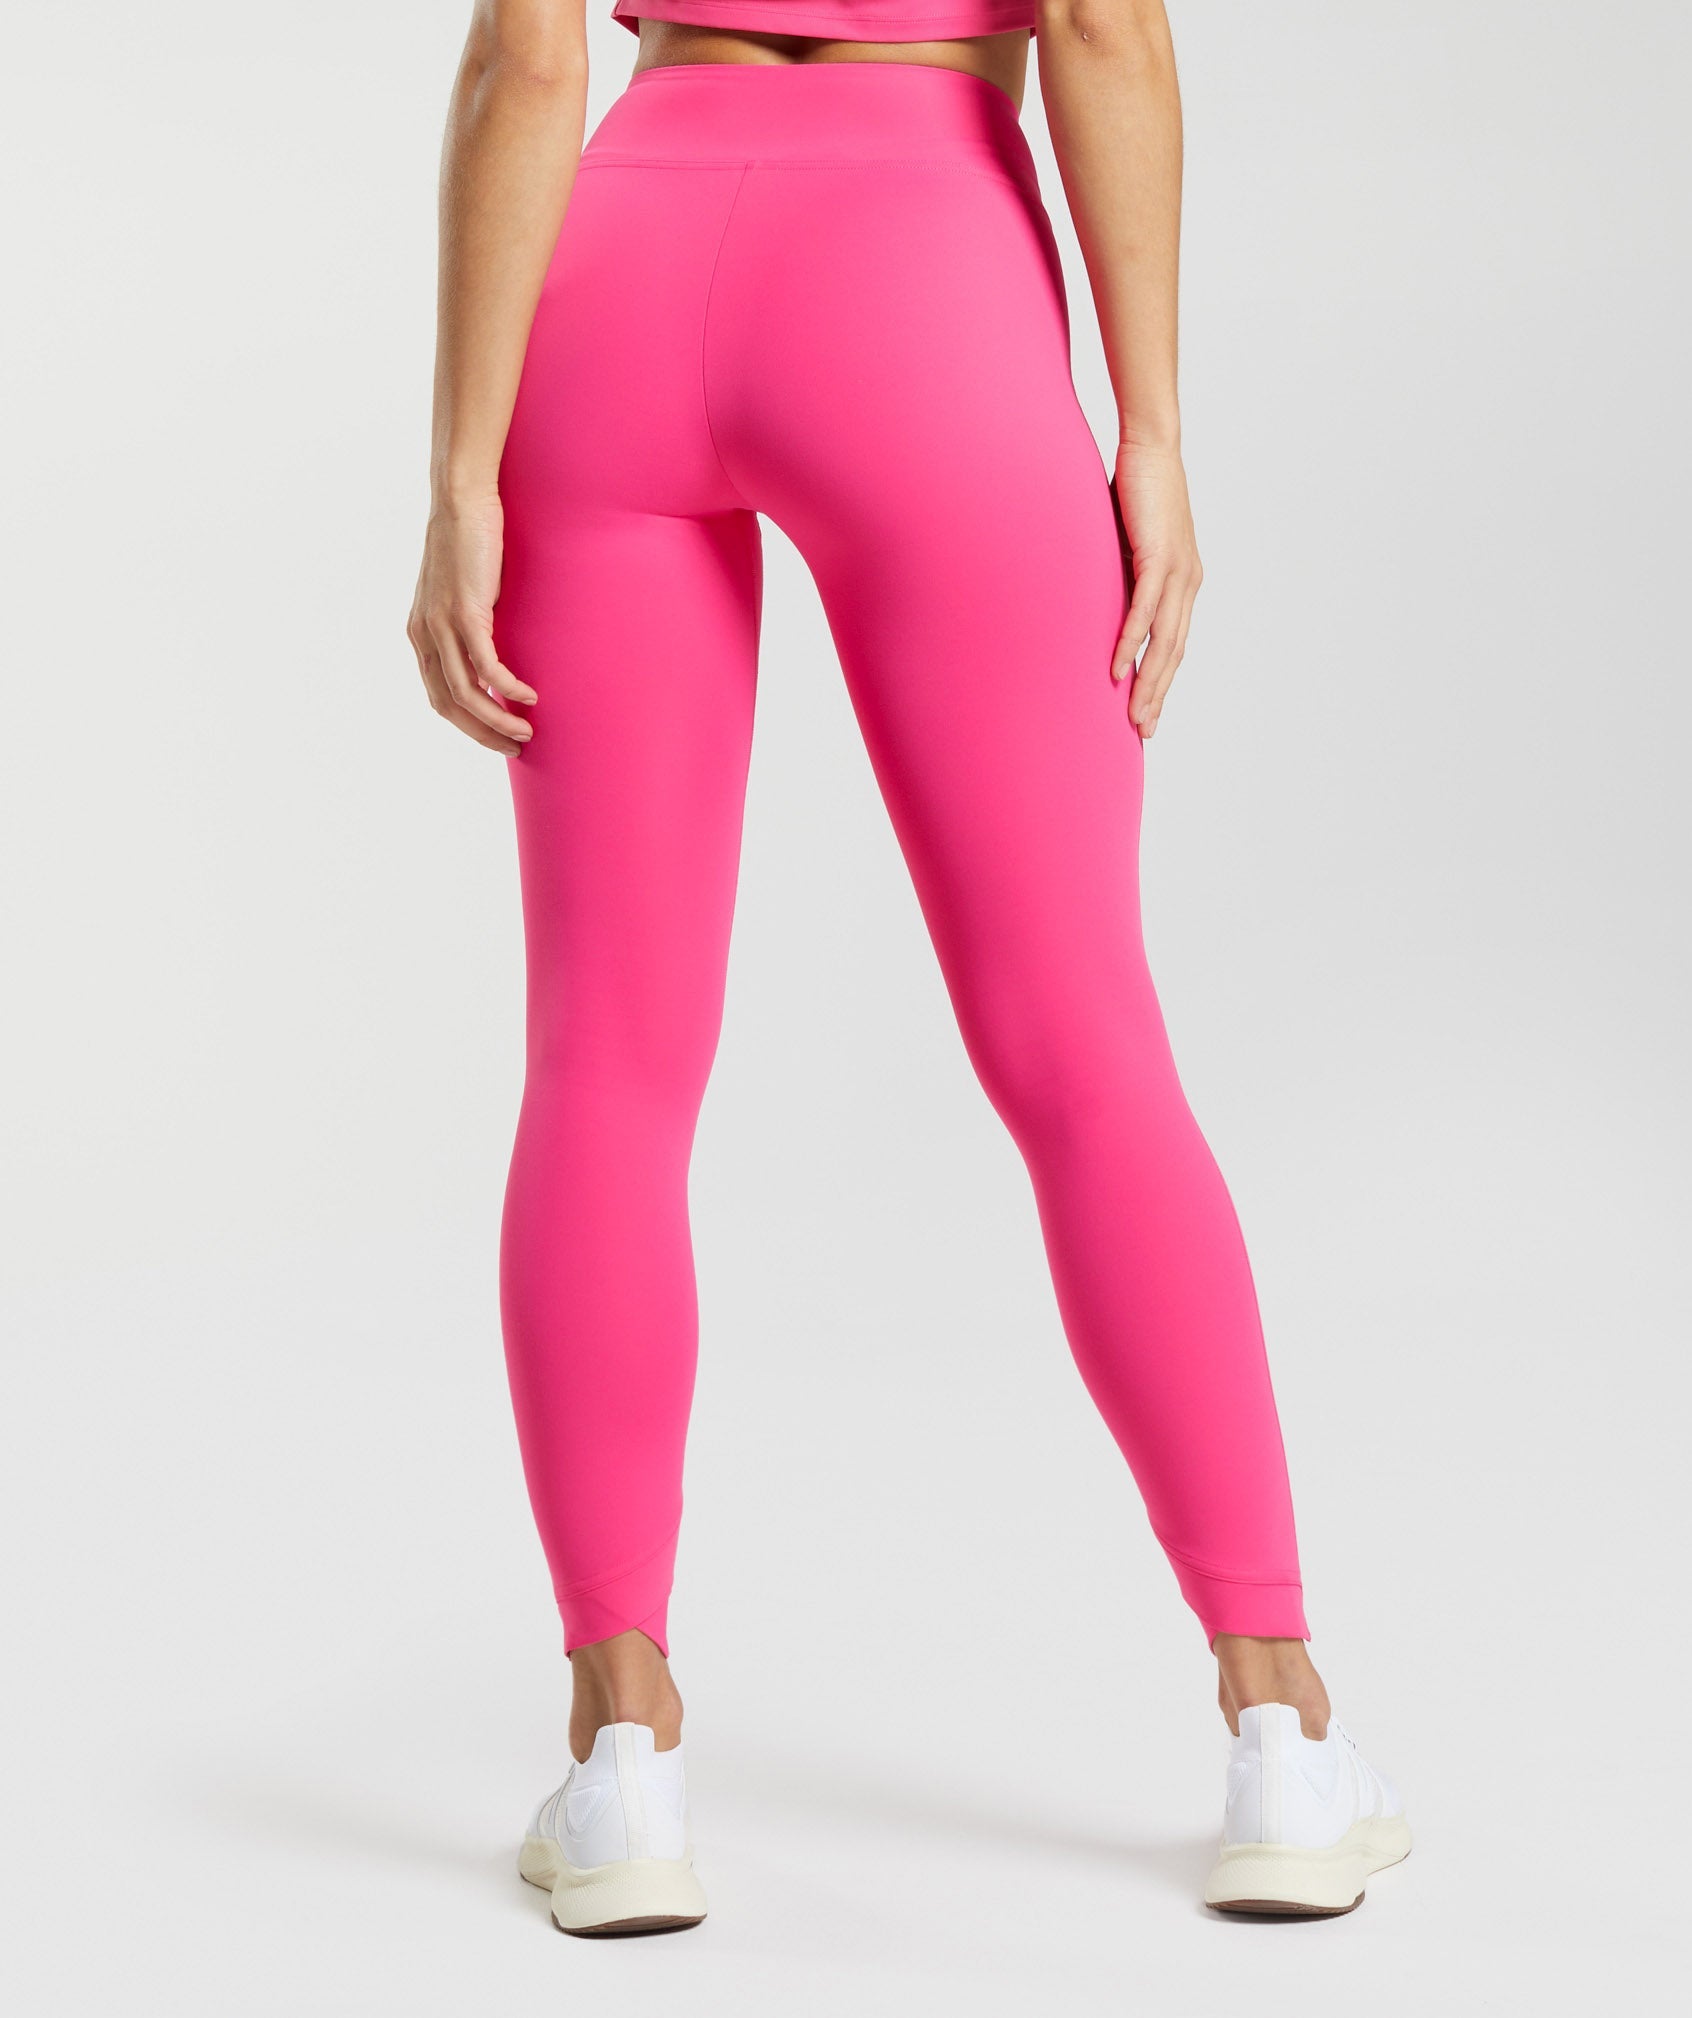 Gymshark Baby Pink Dreamy Leggings XS RARE SOLD OUT